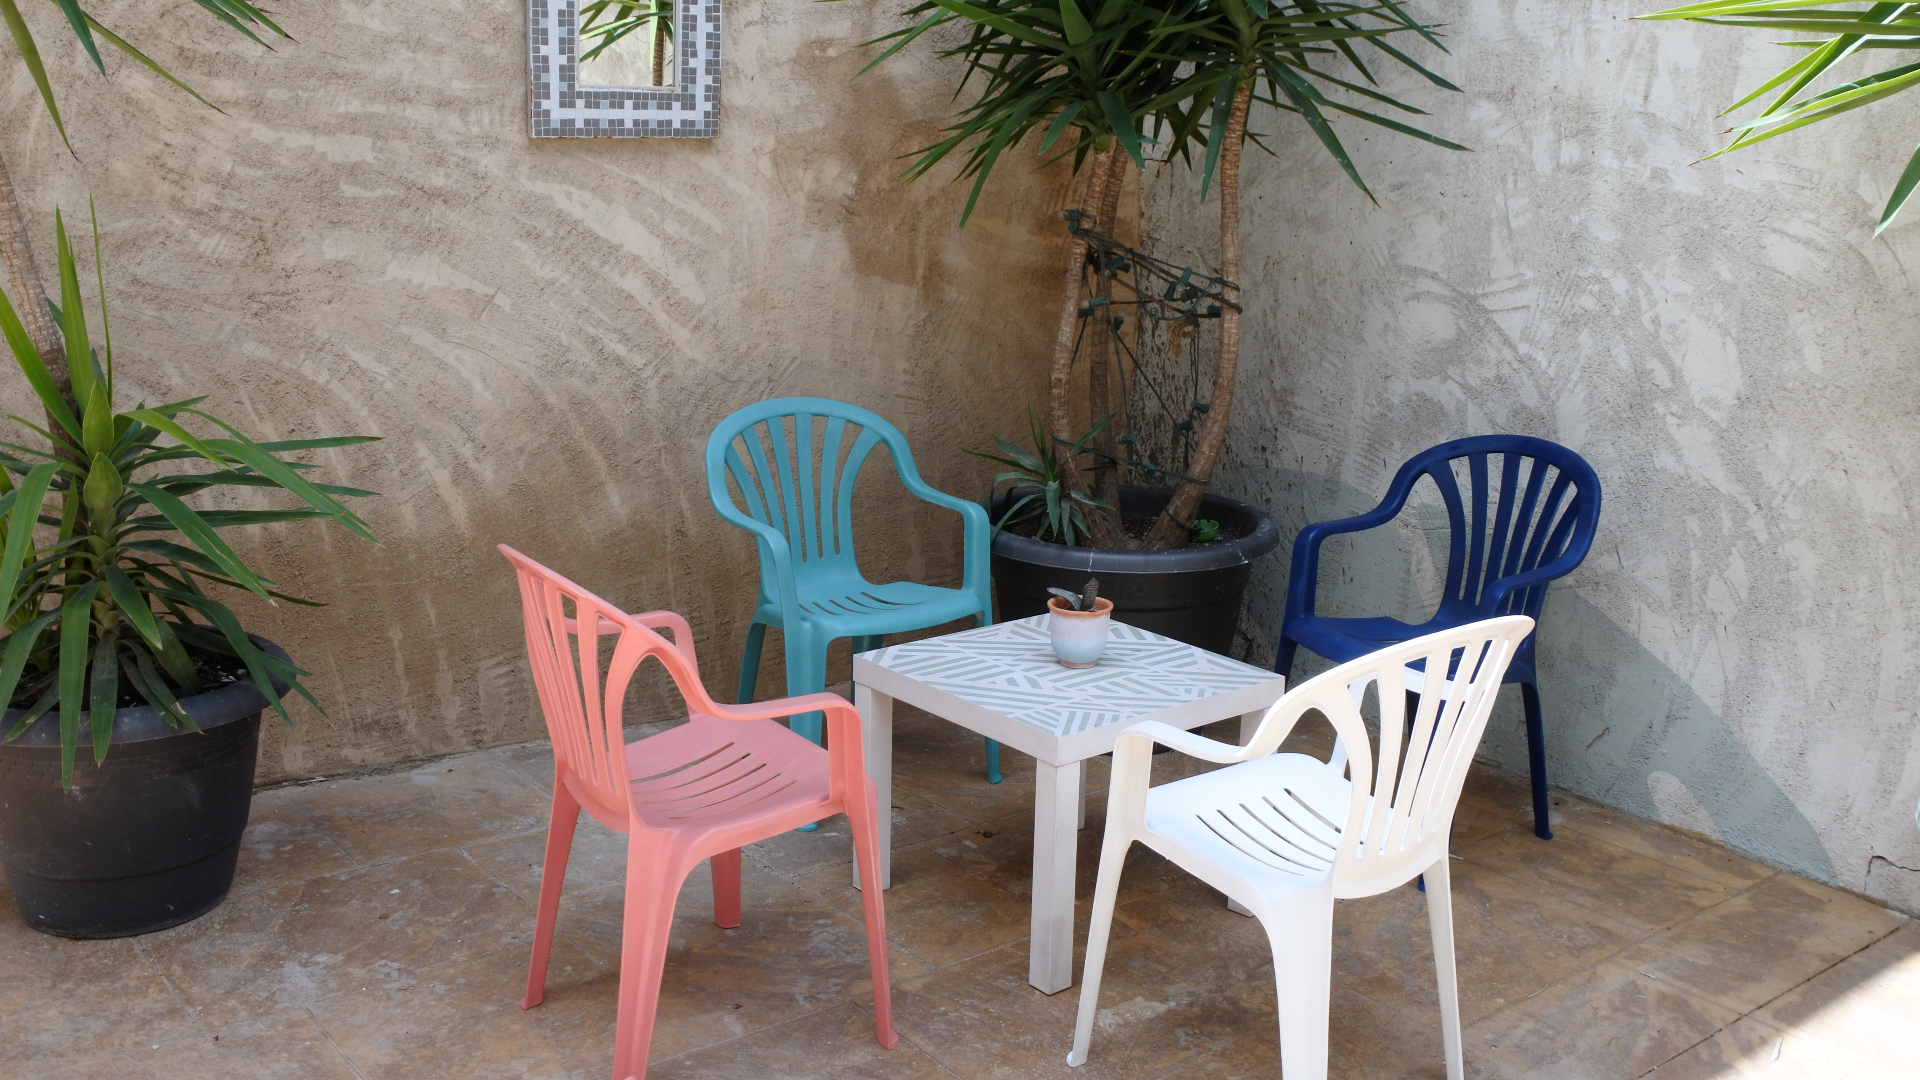 How To Paint Plastic Garden Chairs, What Kind Of Paint Can You Use On Plastic Outdoor Furniture